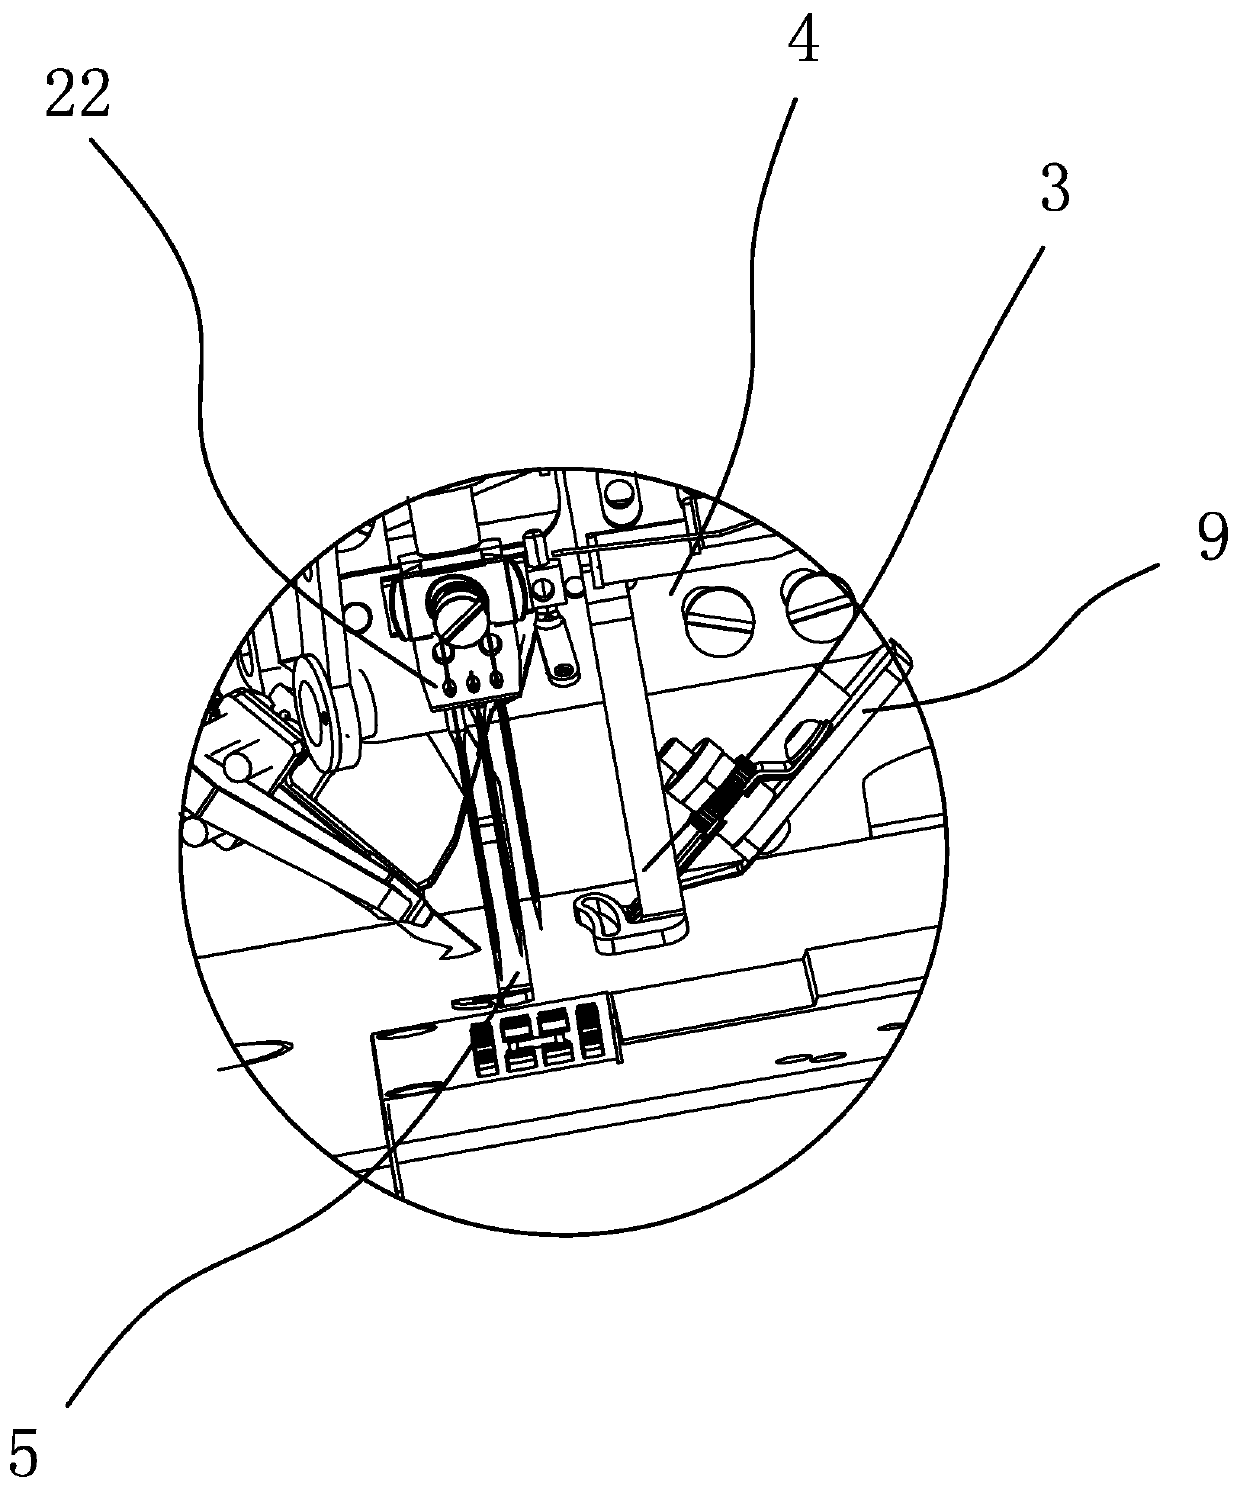 Sewing prevention device for sewing machine